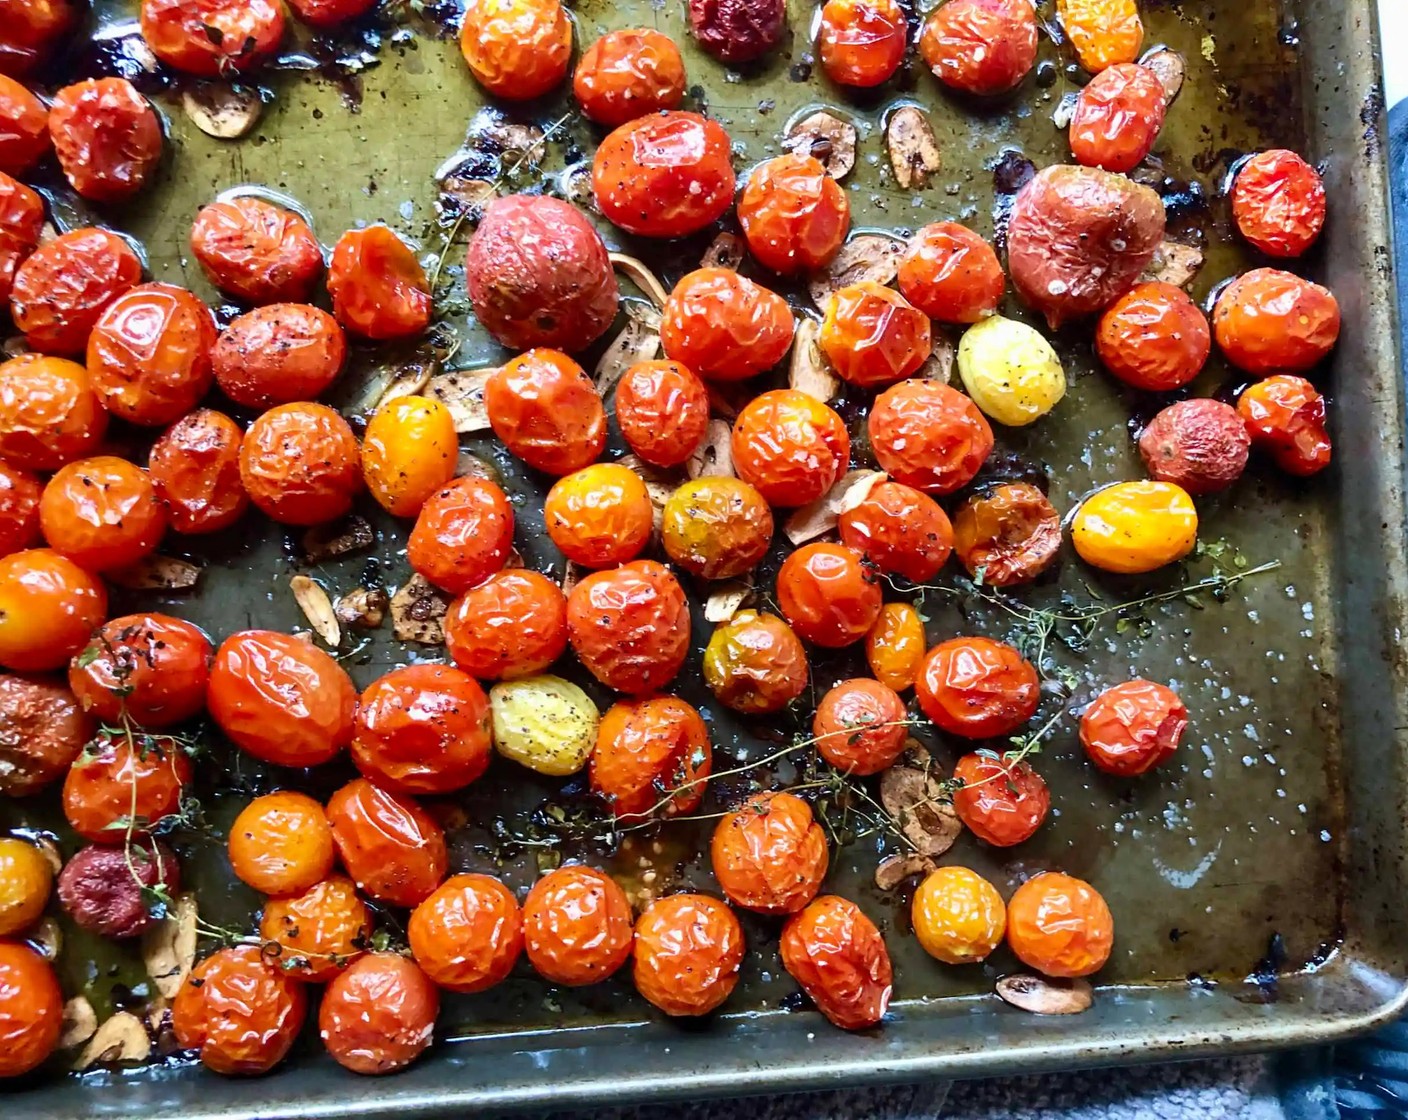 step 3 Bake at 275 degrees F (140 degrees C) until tomatoes are wilted but not all have burst, for 1 1/2-2 hours.